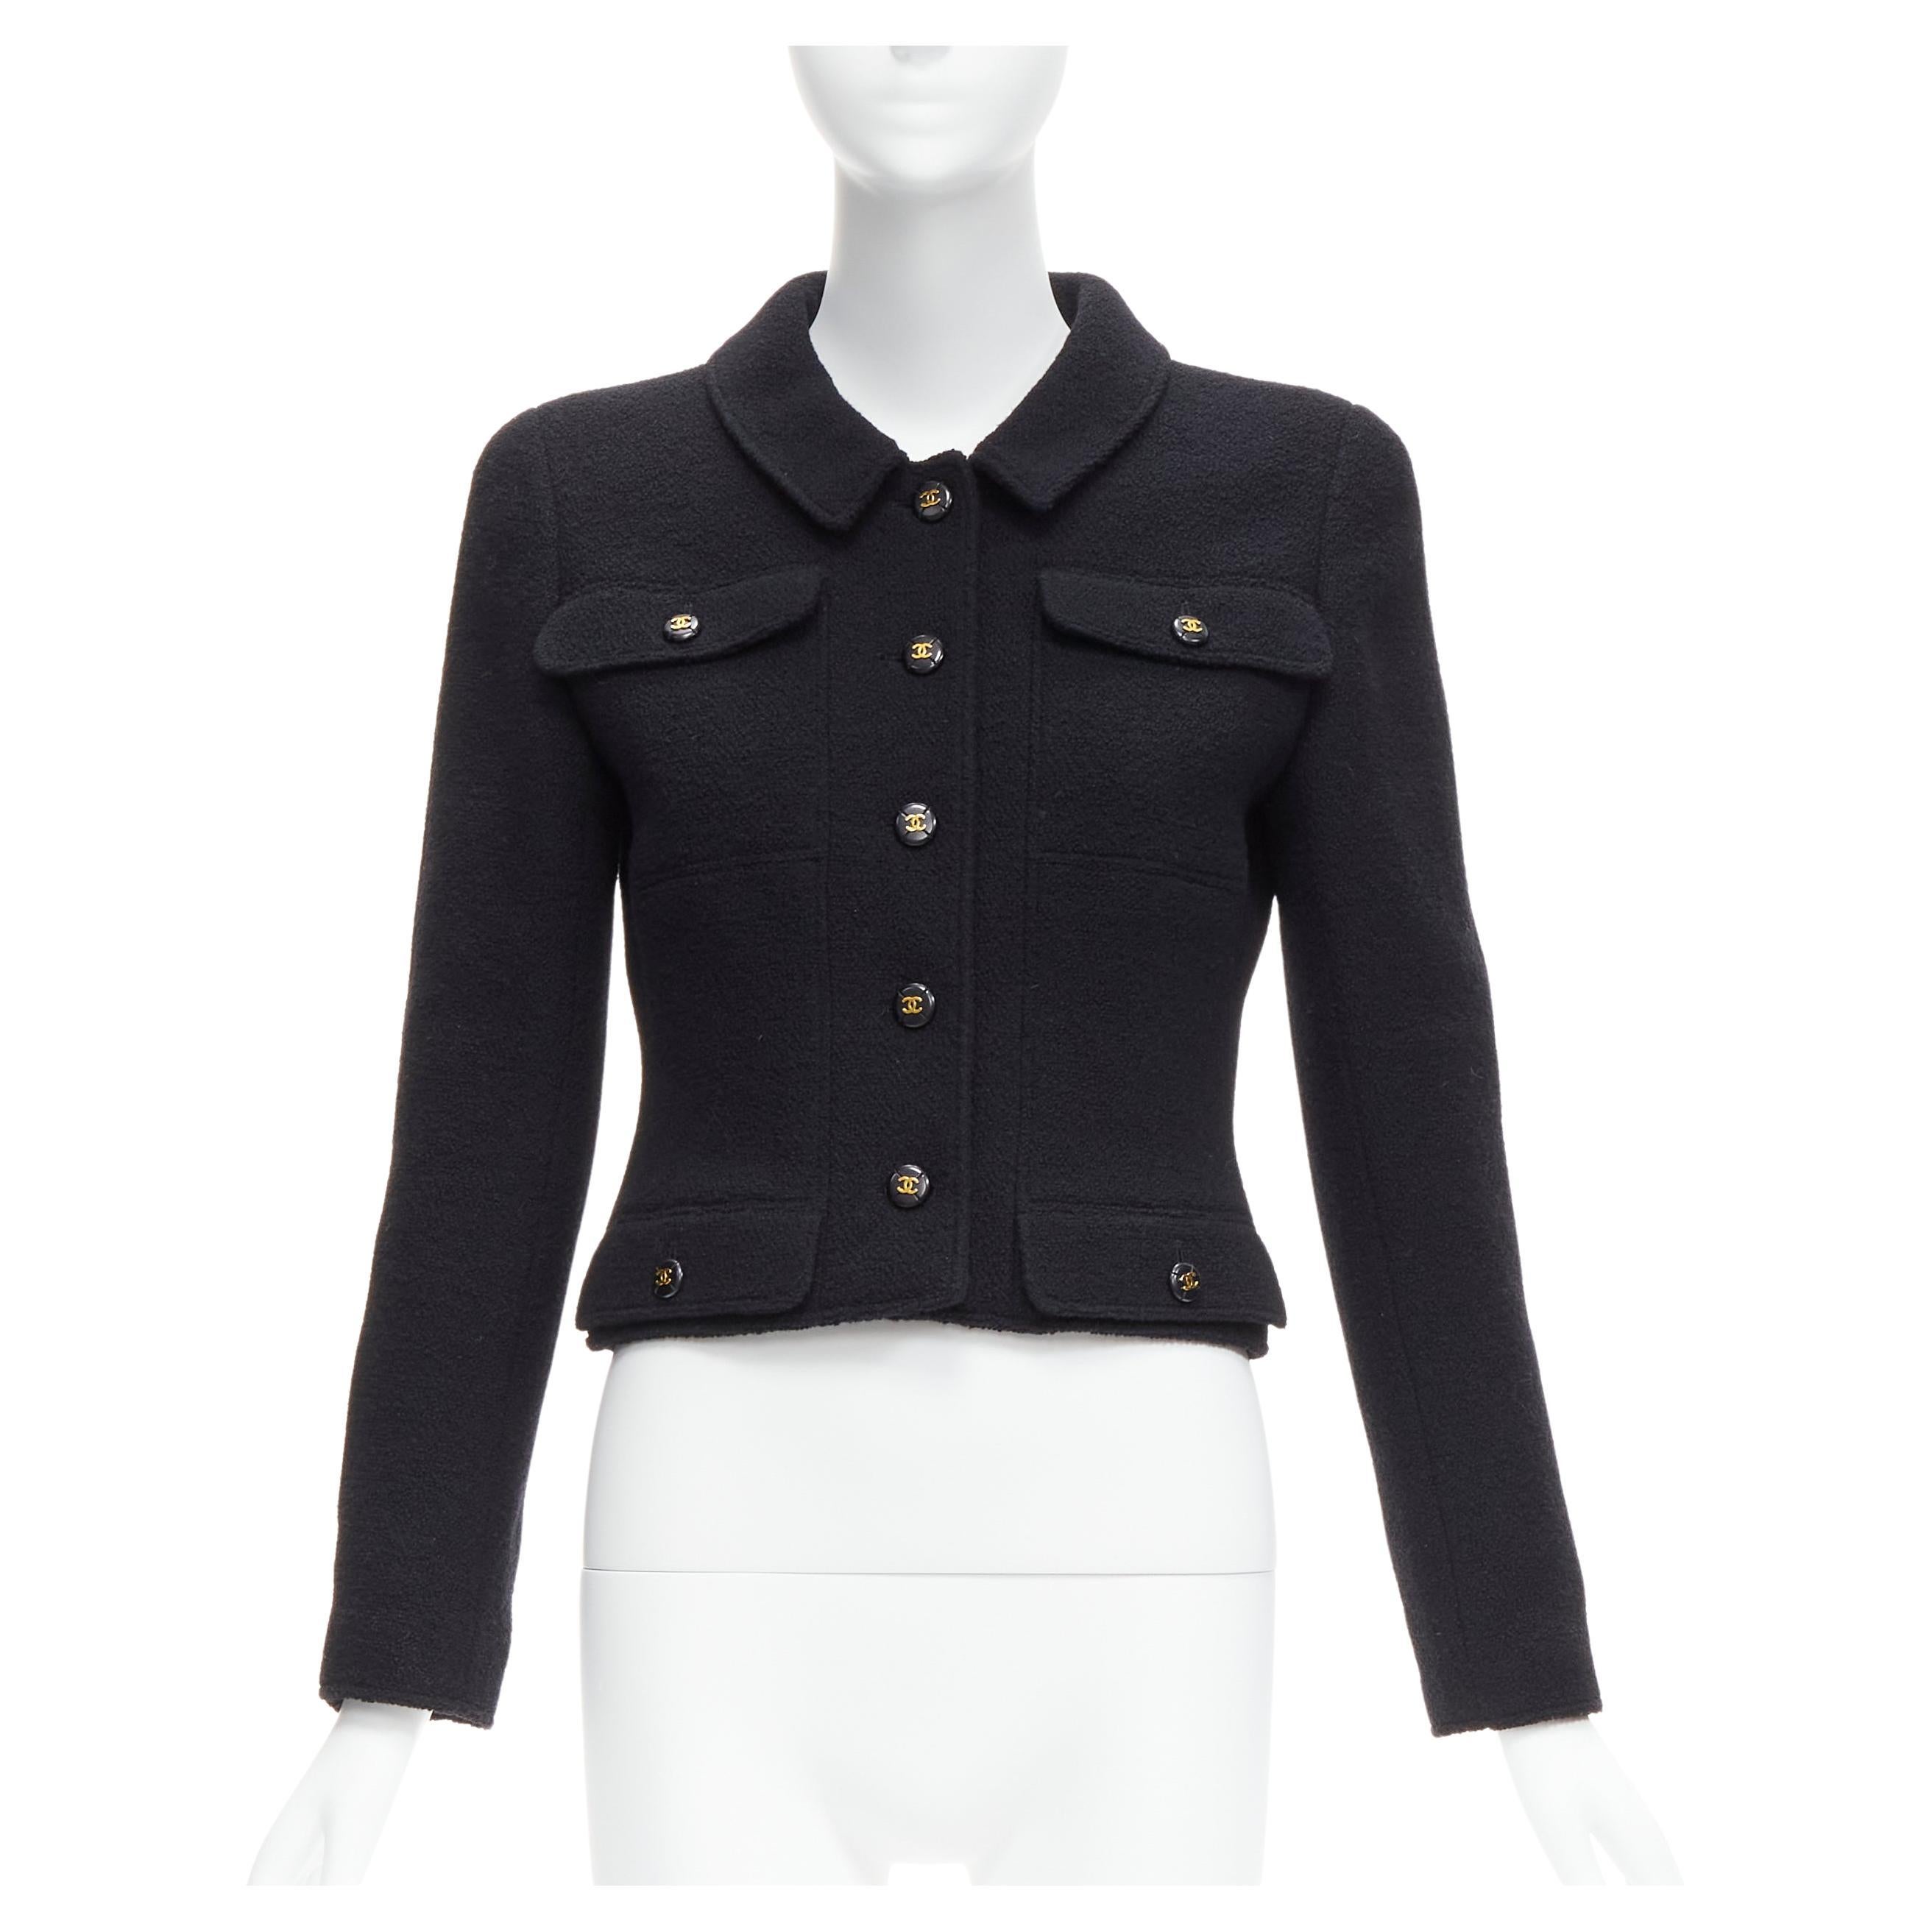 CHANEL 95P black wool crepe gold CC button 4 pocket cropped jacket top